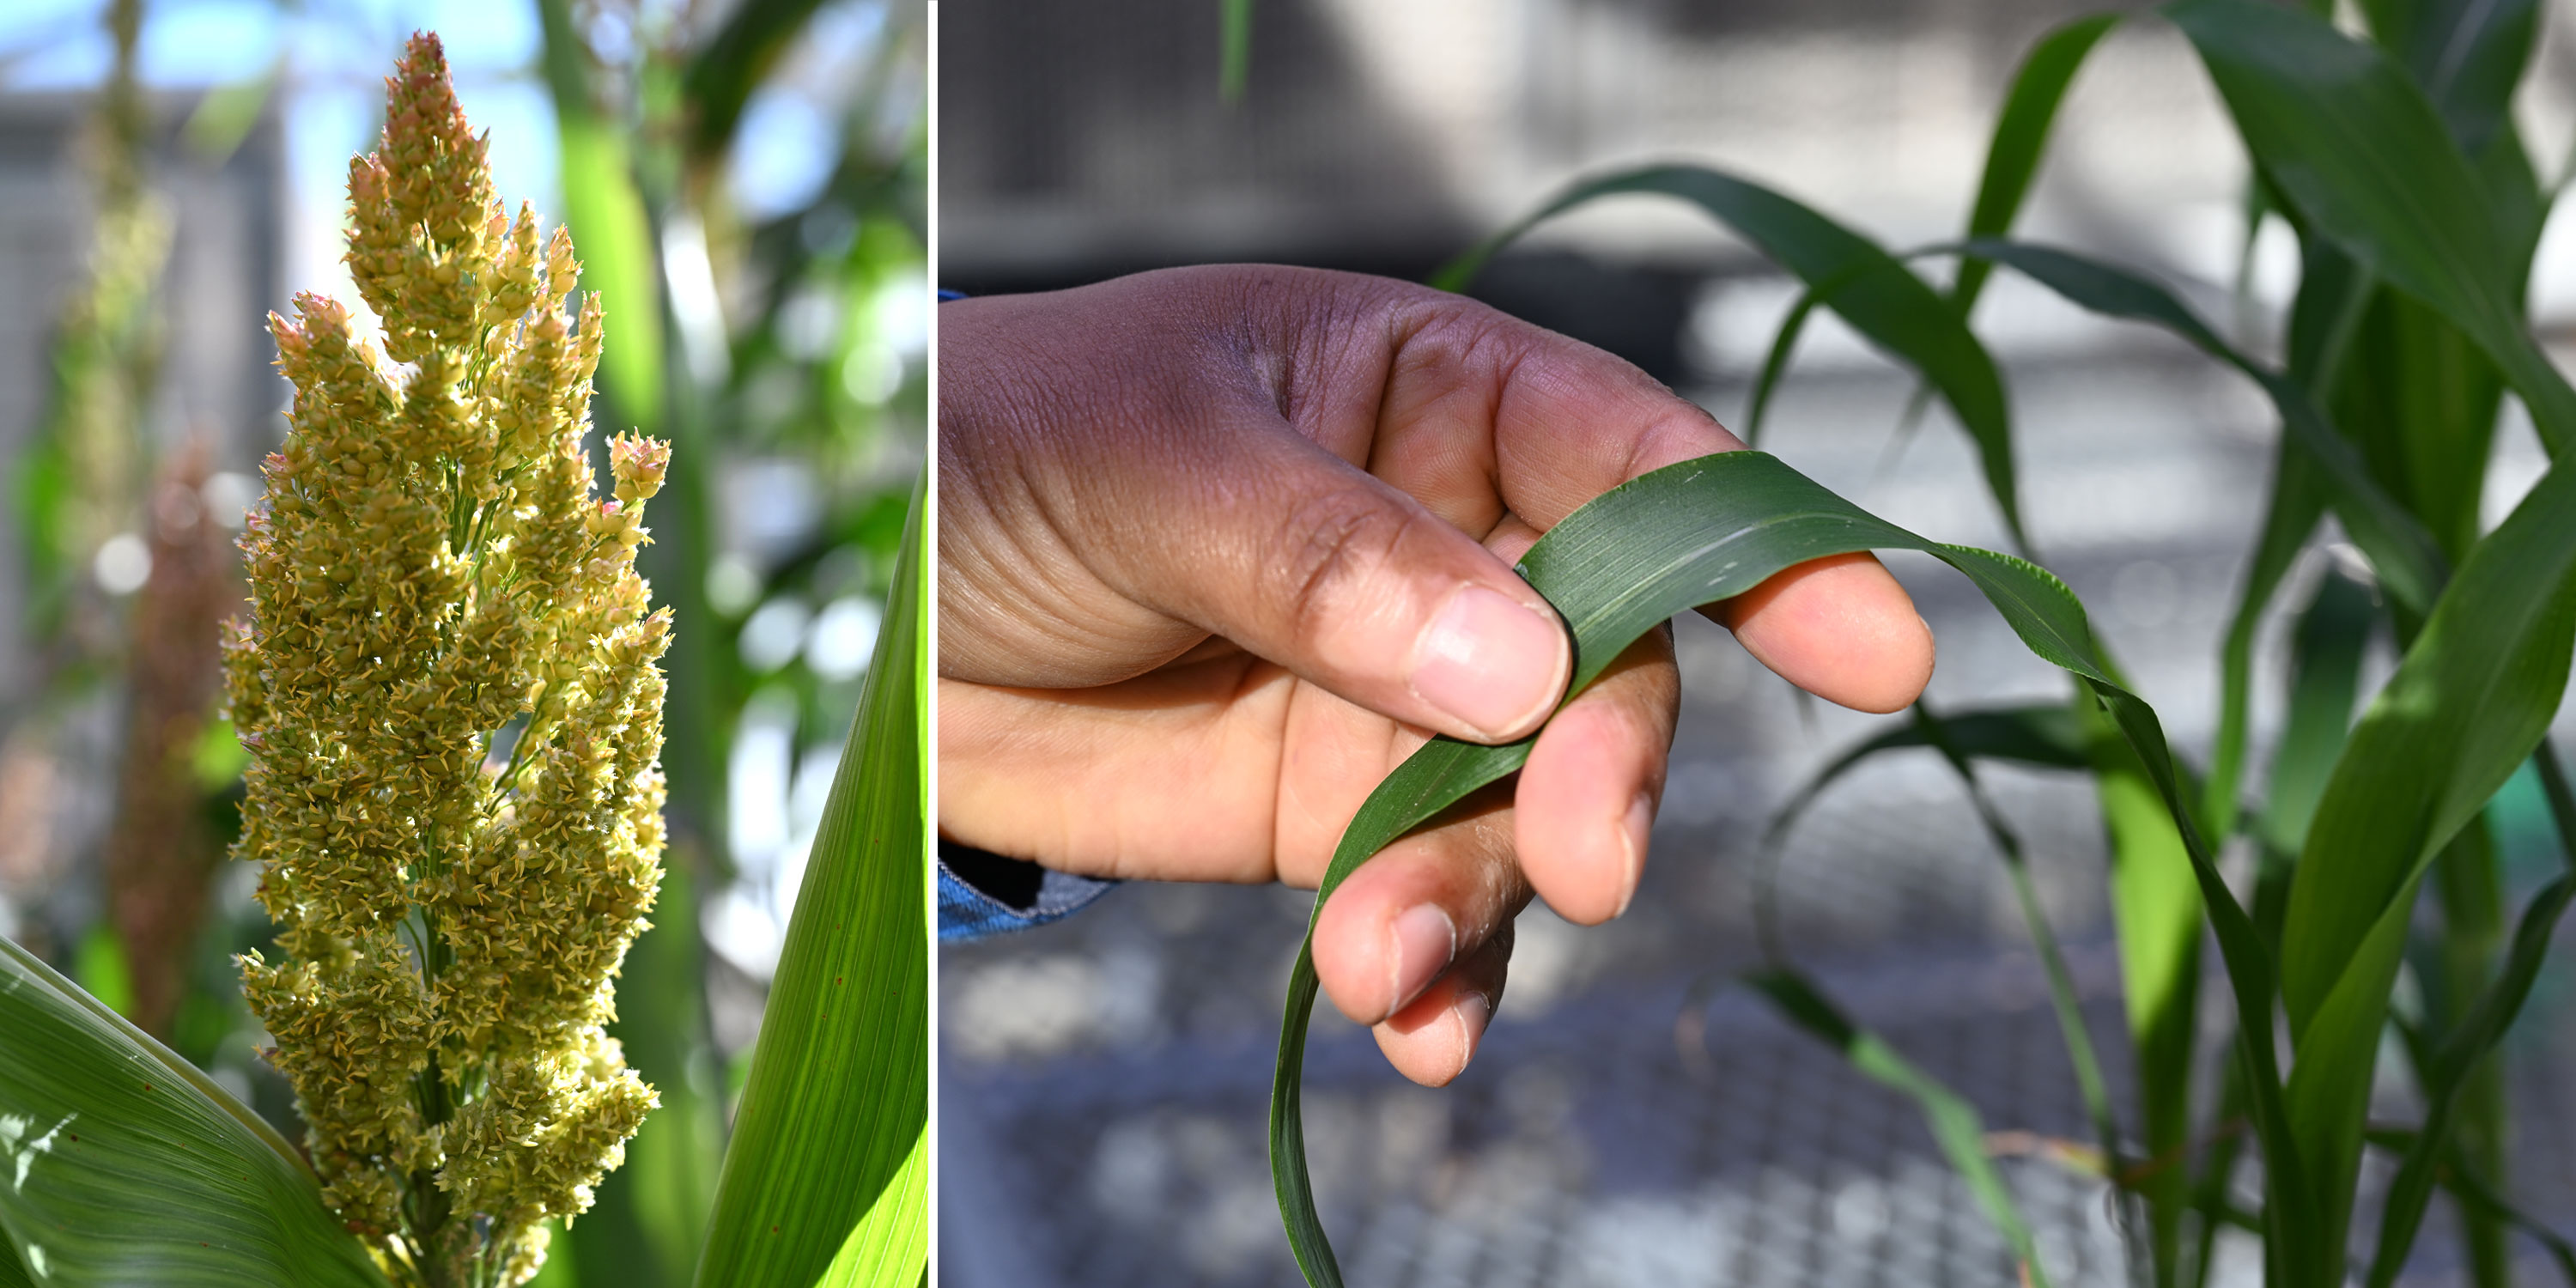 When sorghum begins producing grain-laden flowers (left) the plants stop growing. Brookhaven Lab and Oklahoma State University scientists discovered the genes that control flowering time and modified plants to delay flowering.